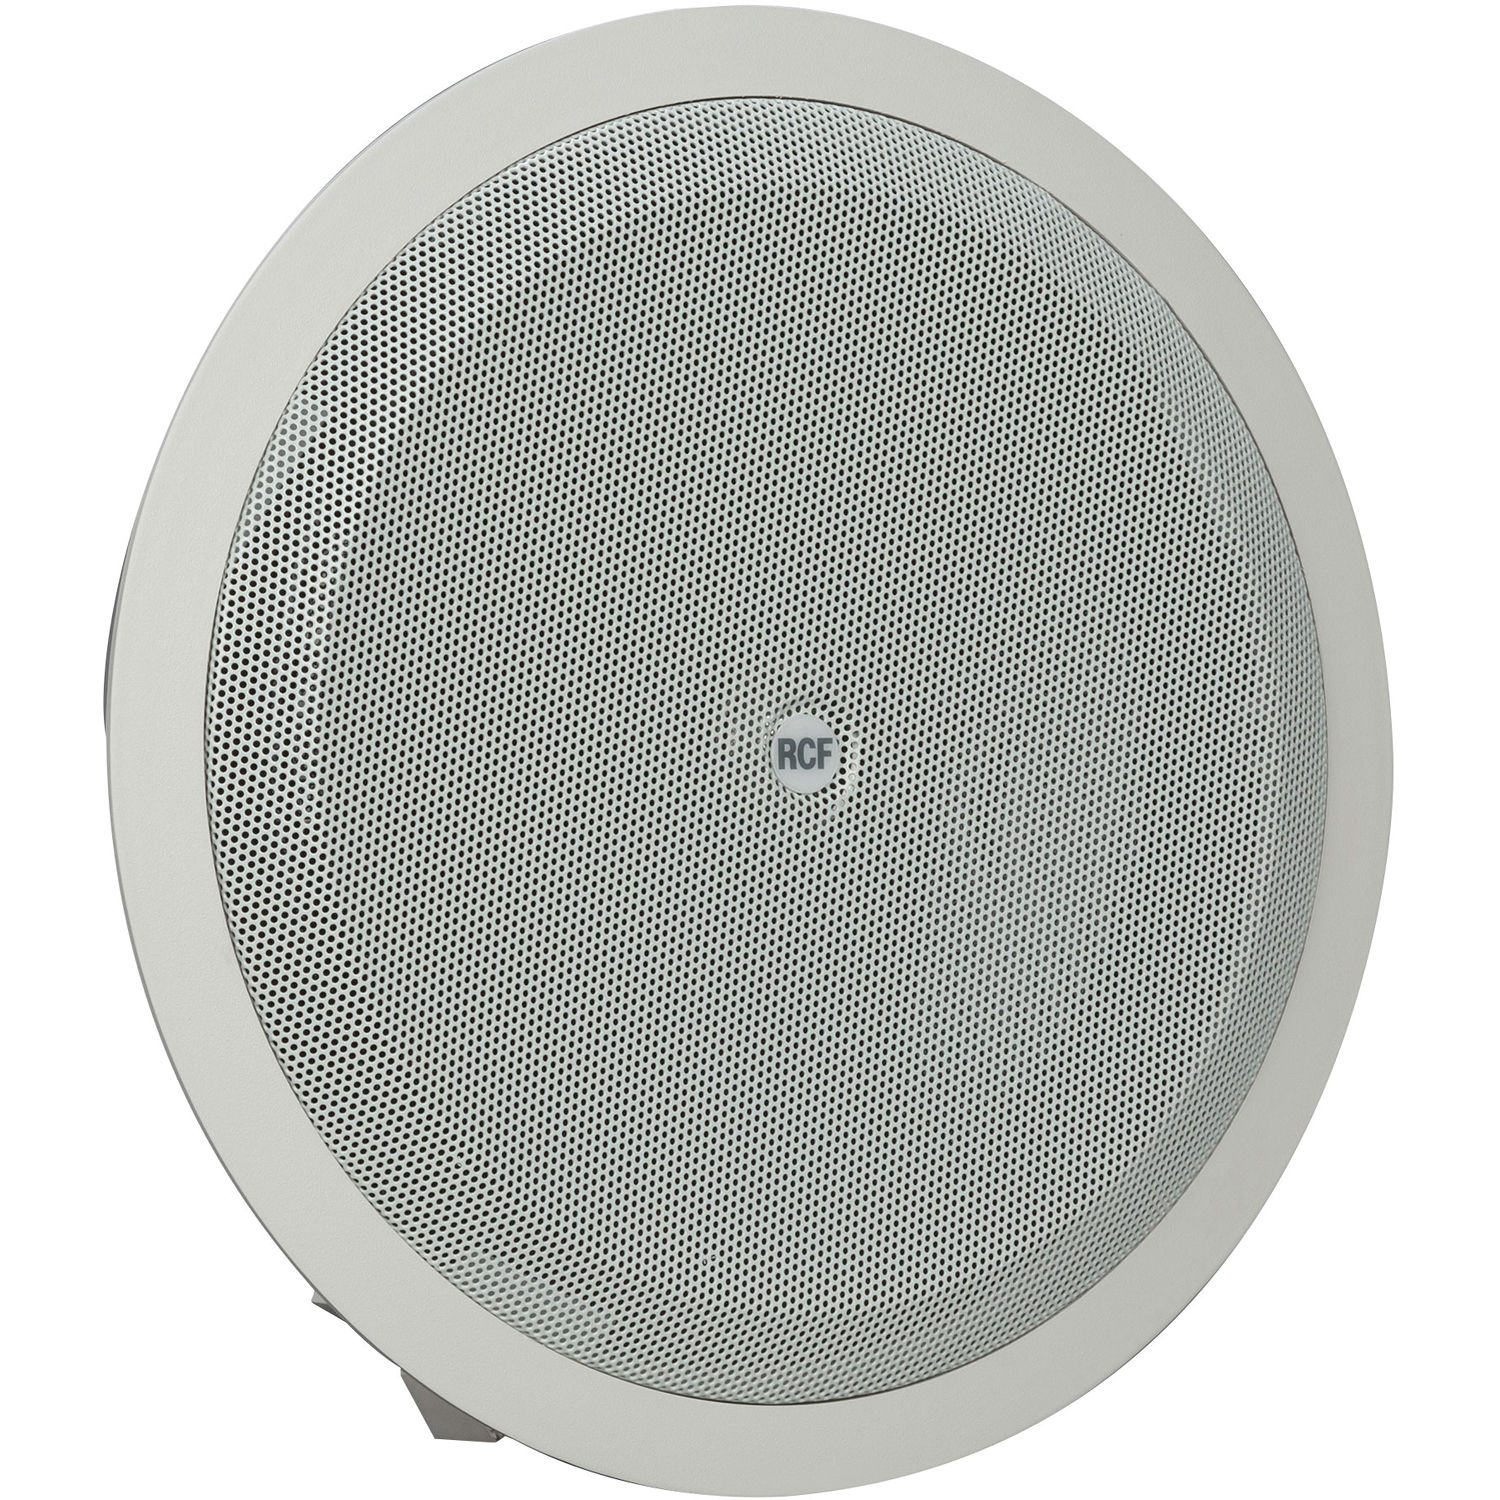 Rcf 2 Way 8 Woofer 1 Tweeter Coaxial Flush Mount Ceiling Speaker 20w 8 Ohms 100v 70v Ip44 Rated